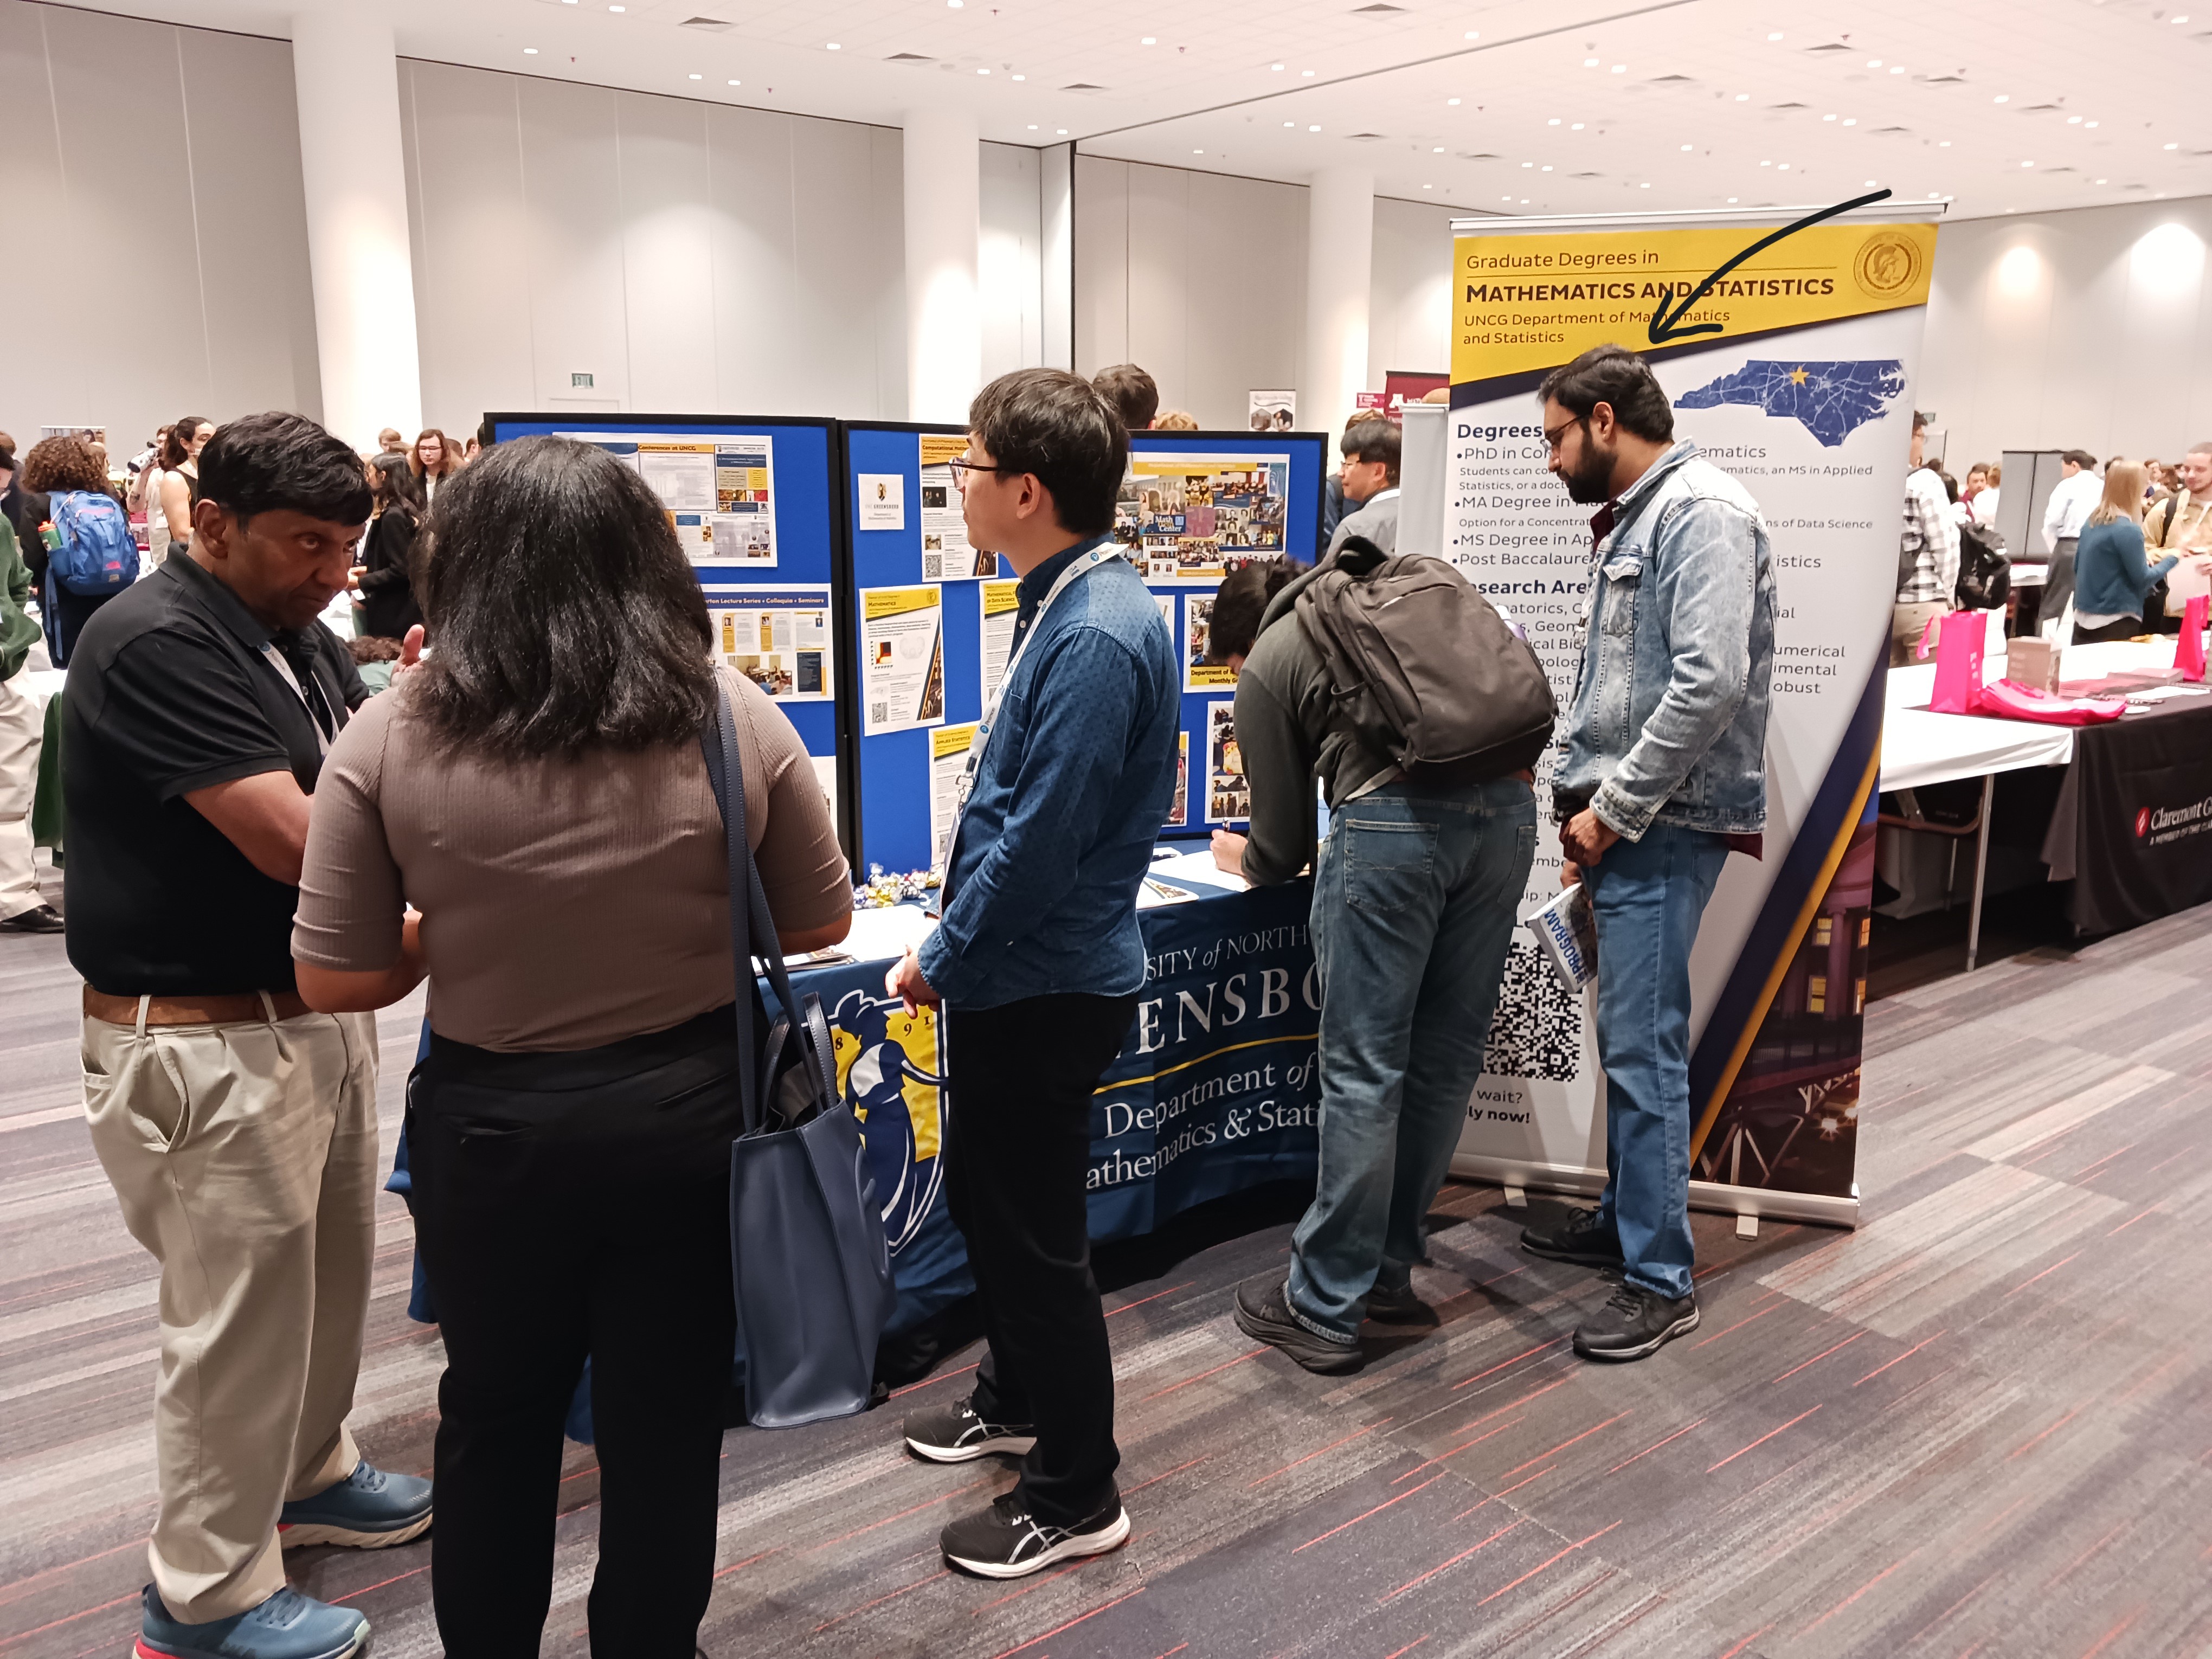 Interacting with prospective graduate students at graduate school fair